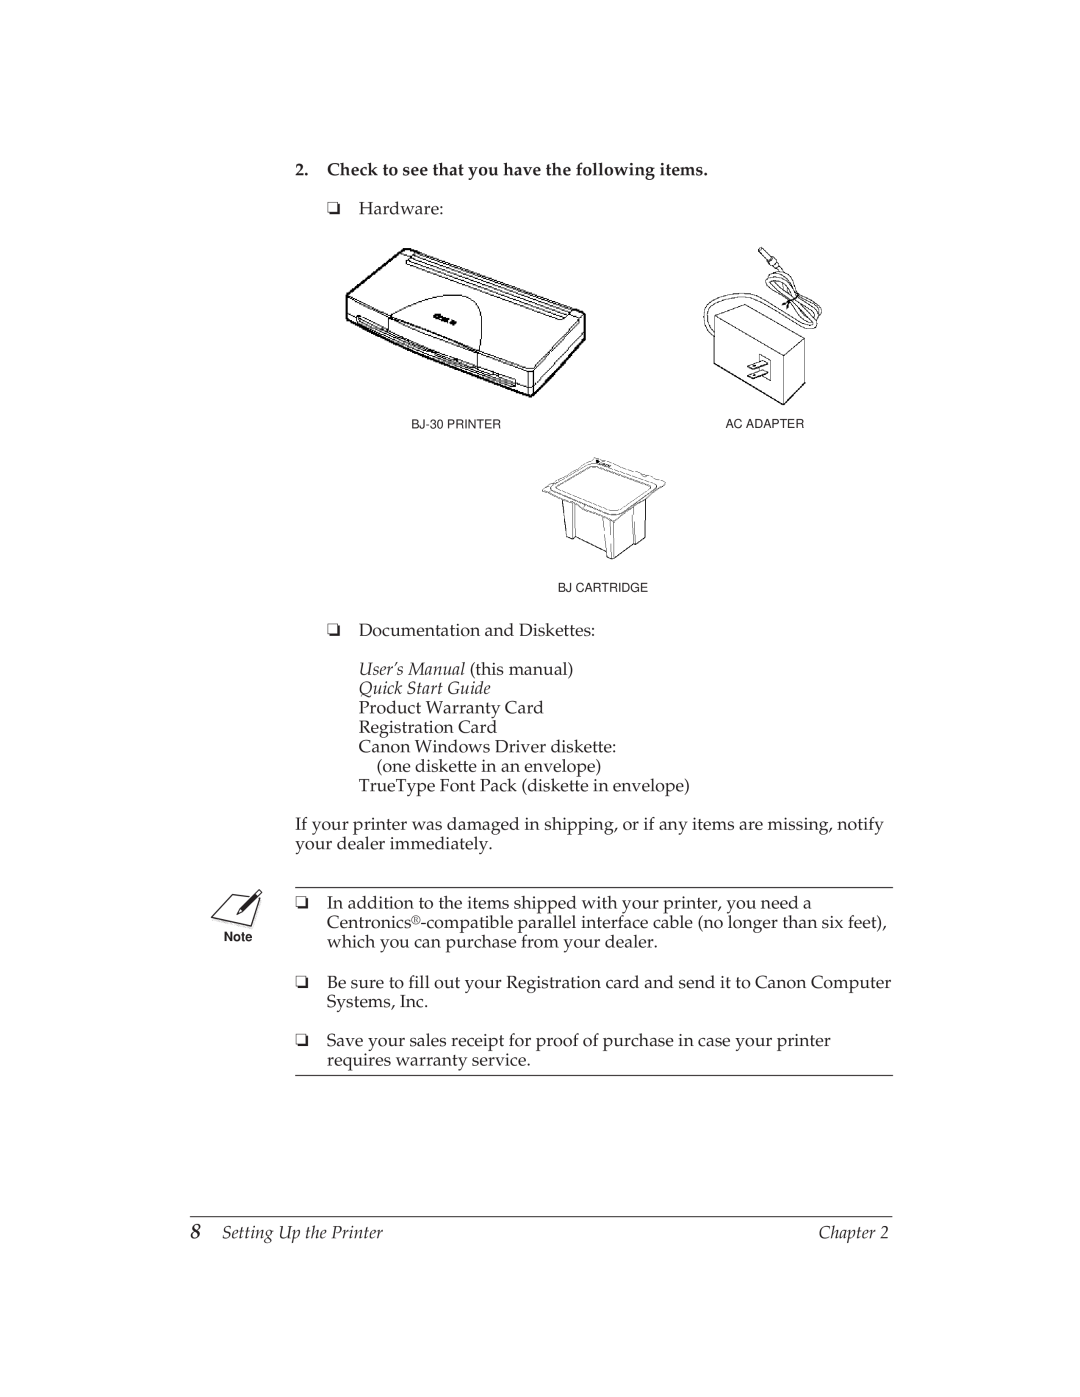 Canon BJ-30 manual Check to see that you have the following items 